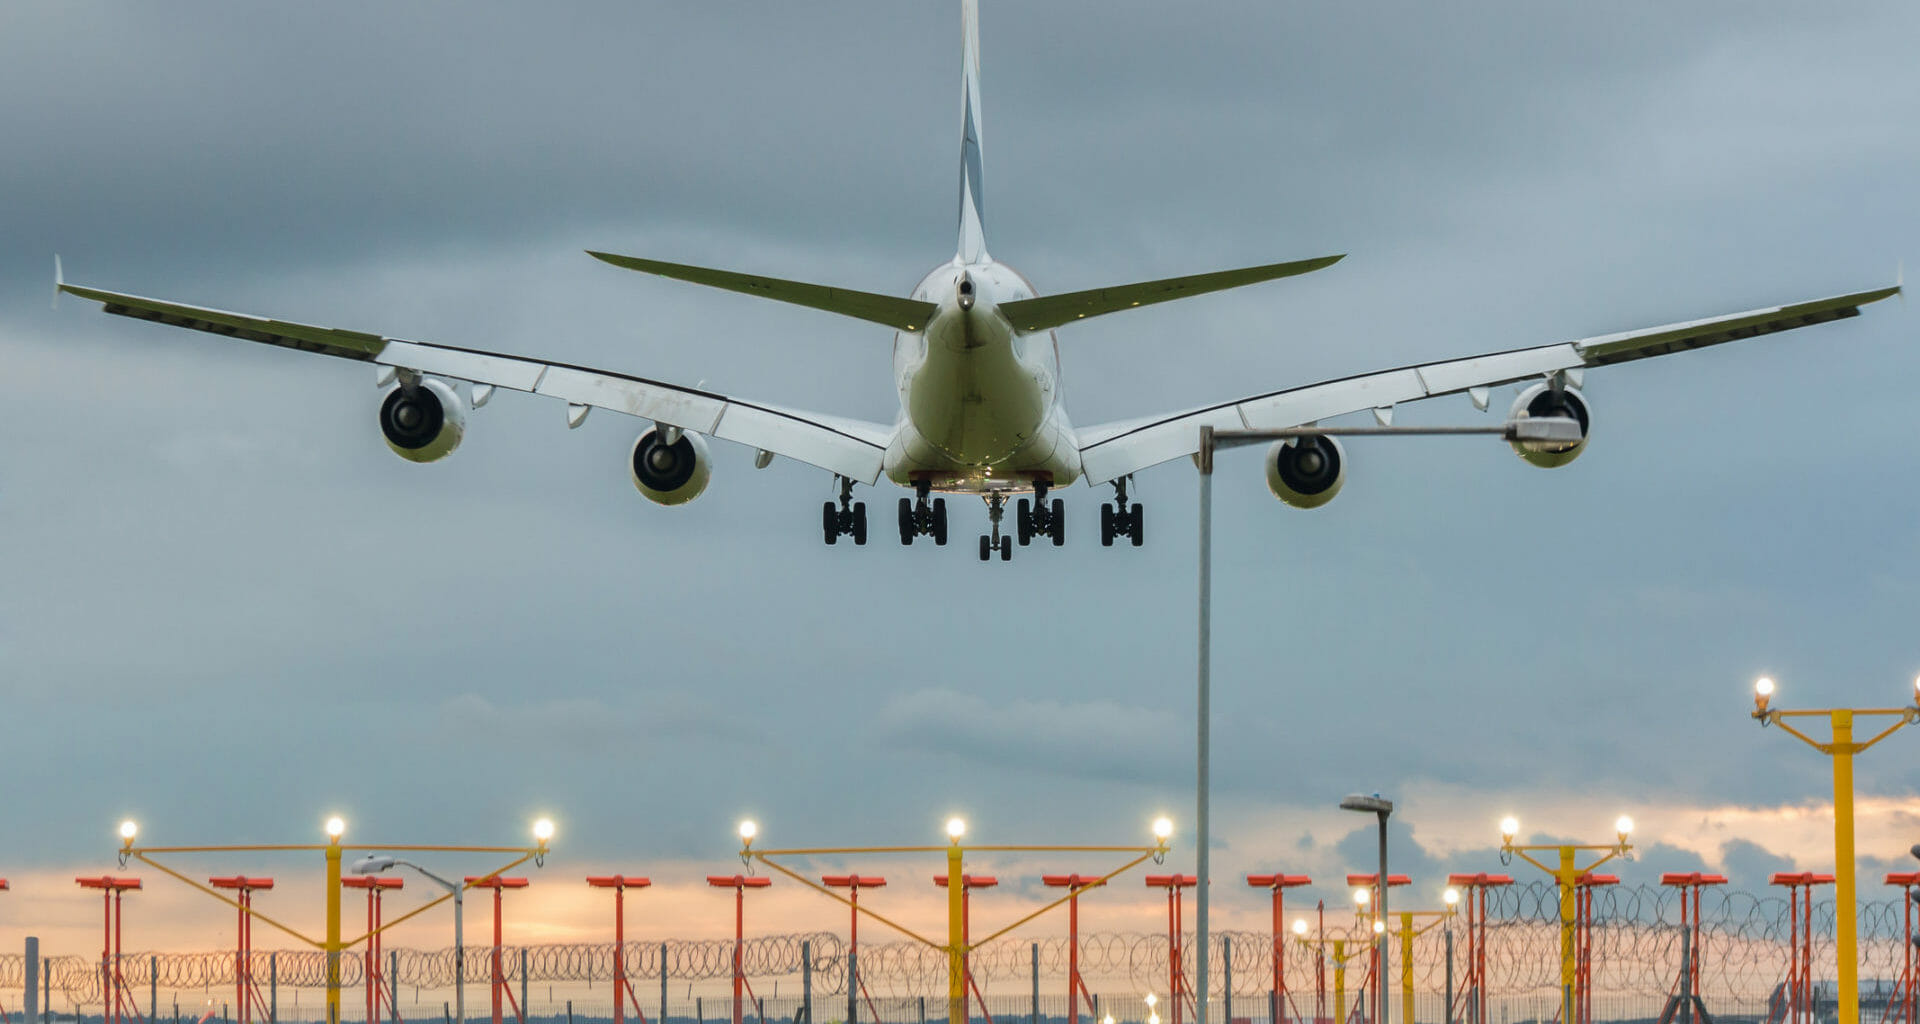 Government accused of ‘greenwashing deal’ in support of Heathrow 3